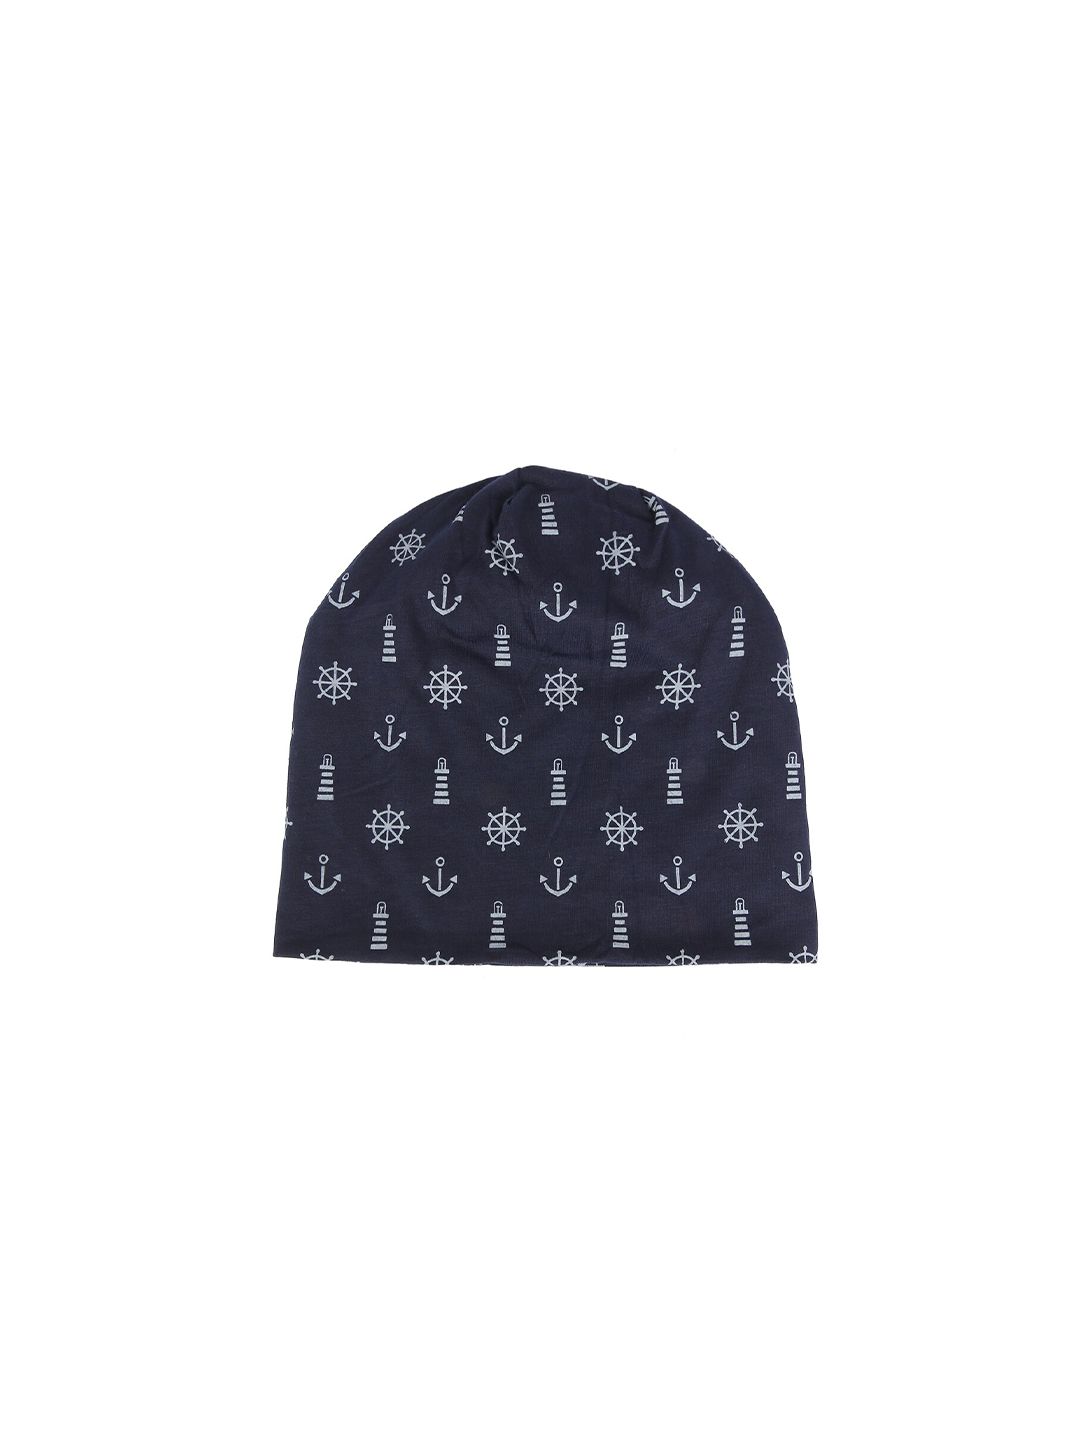 iSWEVEN Navy Blue & White Printed Cotton Beanie Price in India